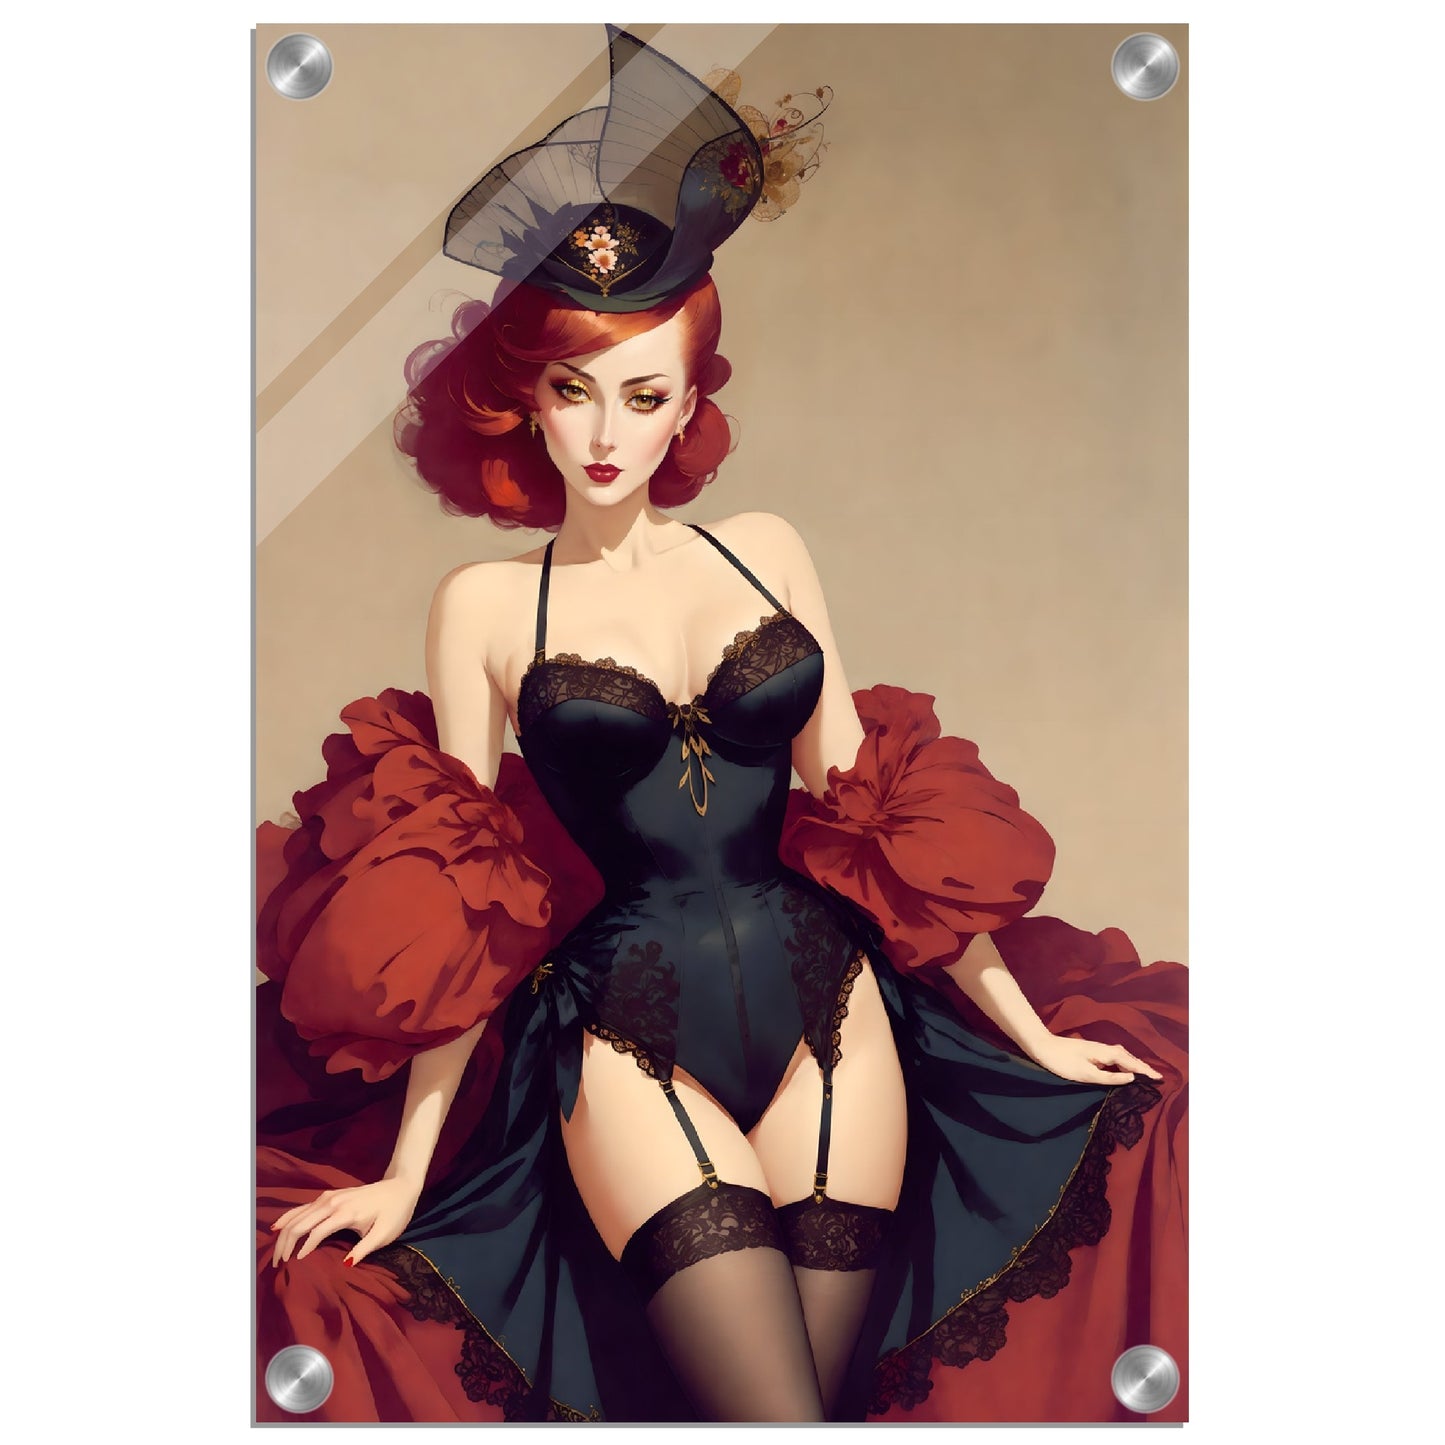 Daily Pinup #72 - Sophistication Wall Art